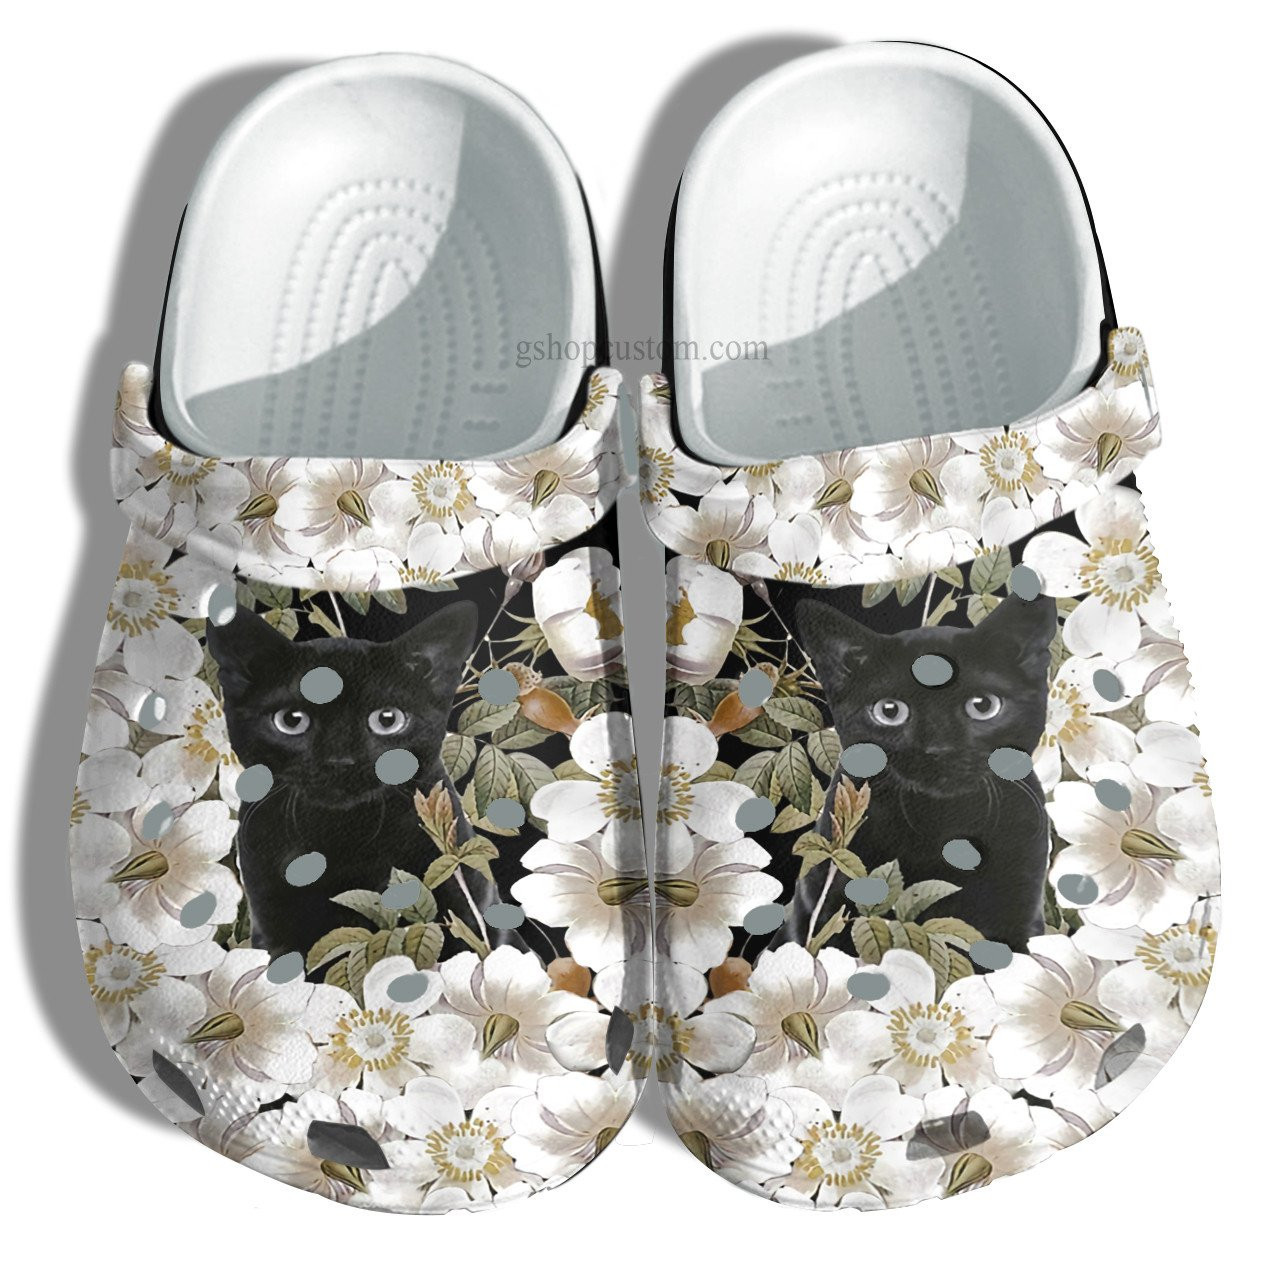 Daisy Flower Black Cat Mom Crocs Shoes Gift Women - Birthday Black Cat Crocs Shoes Croc Clogs Gift Mother Day